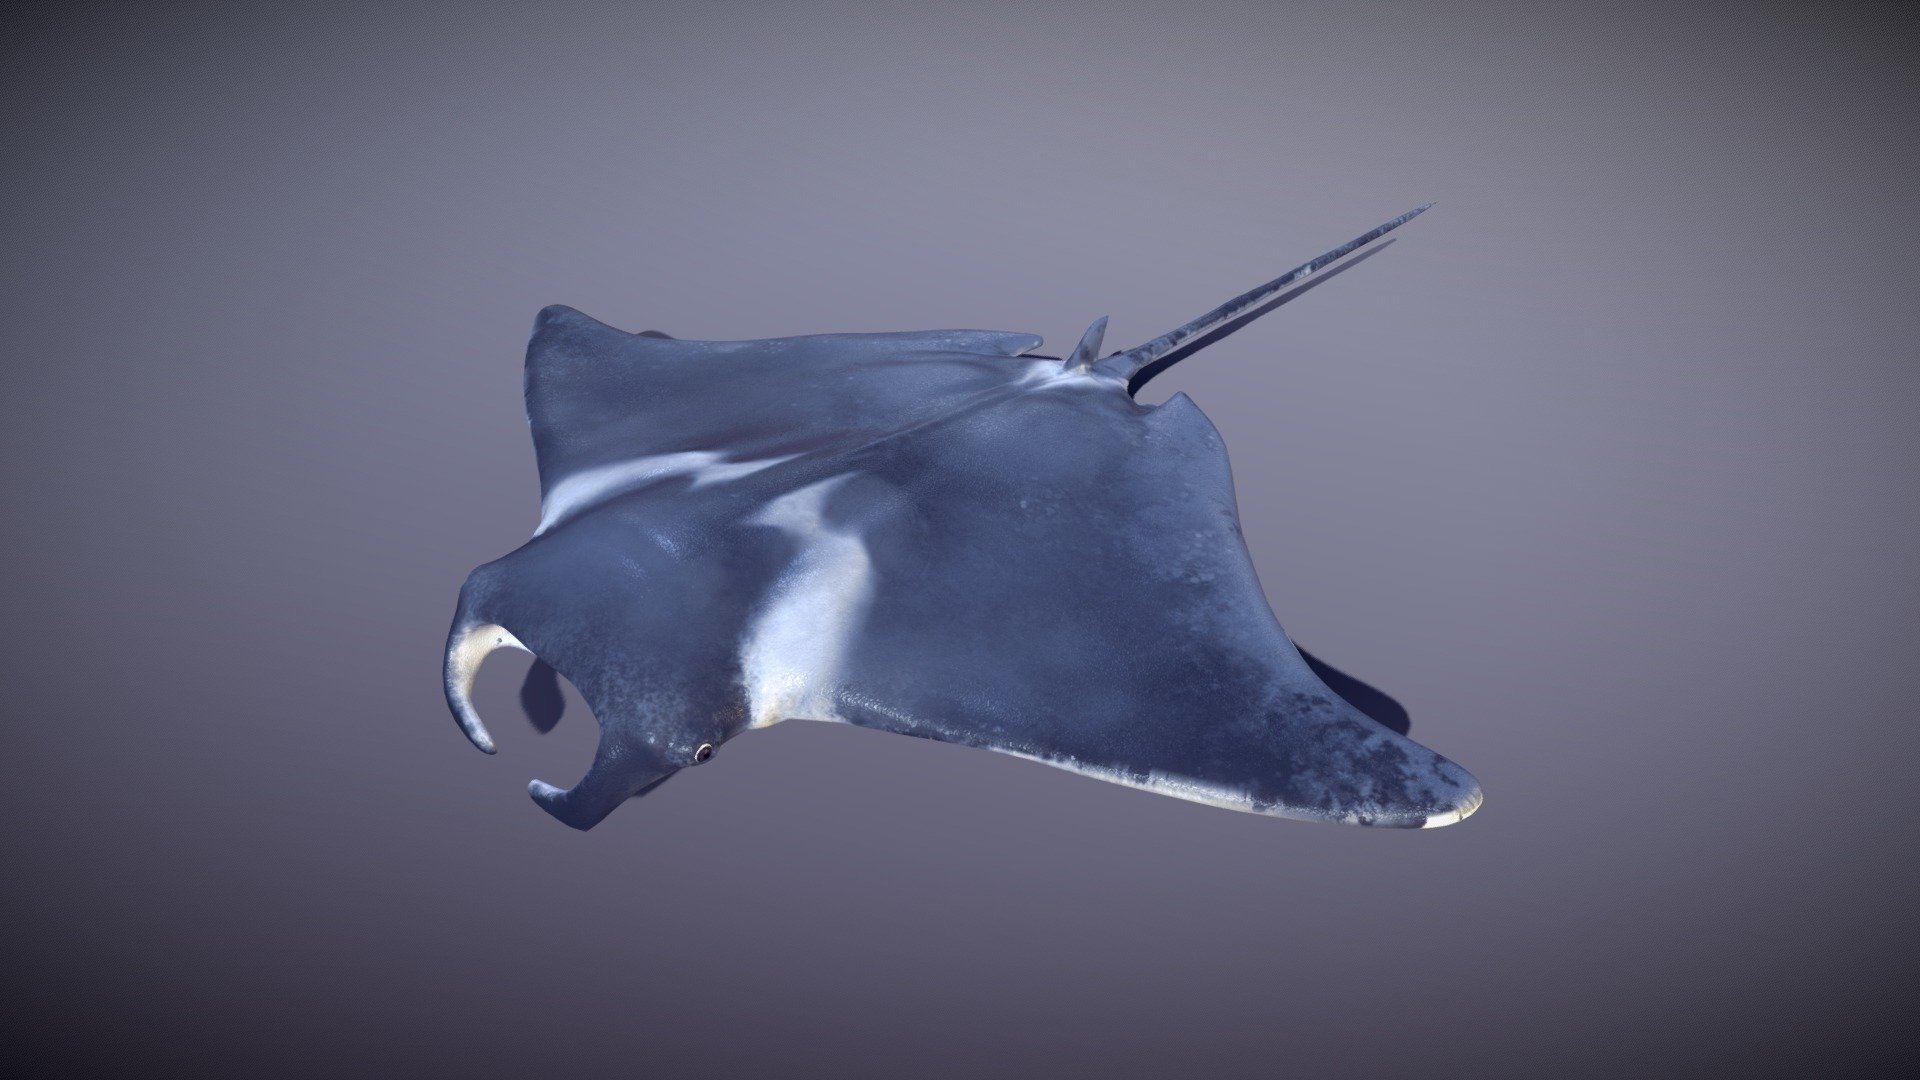 The Manta Ray 3d model was made in blender 2.9 and painted in substance painter ,is low poly for game ready and animations ,  it haves 3 LODs  for games.

LOD0 :9628
LOD1:5350
LOD2:948

It is fully rigged with basic bones , it have a total of 4 animations : idle , swim ,CurveSwim and Tail Slash .

The texture comes with 4k and 2k  : diffuse , normal , roughnesst and AO maps , baked normal map from a high poly model and place it in the low poly model , uv wrapped it manually .

Eyes and body , all is in one texture .

it comes with blend file and textures attached in rar 3d model